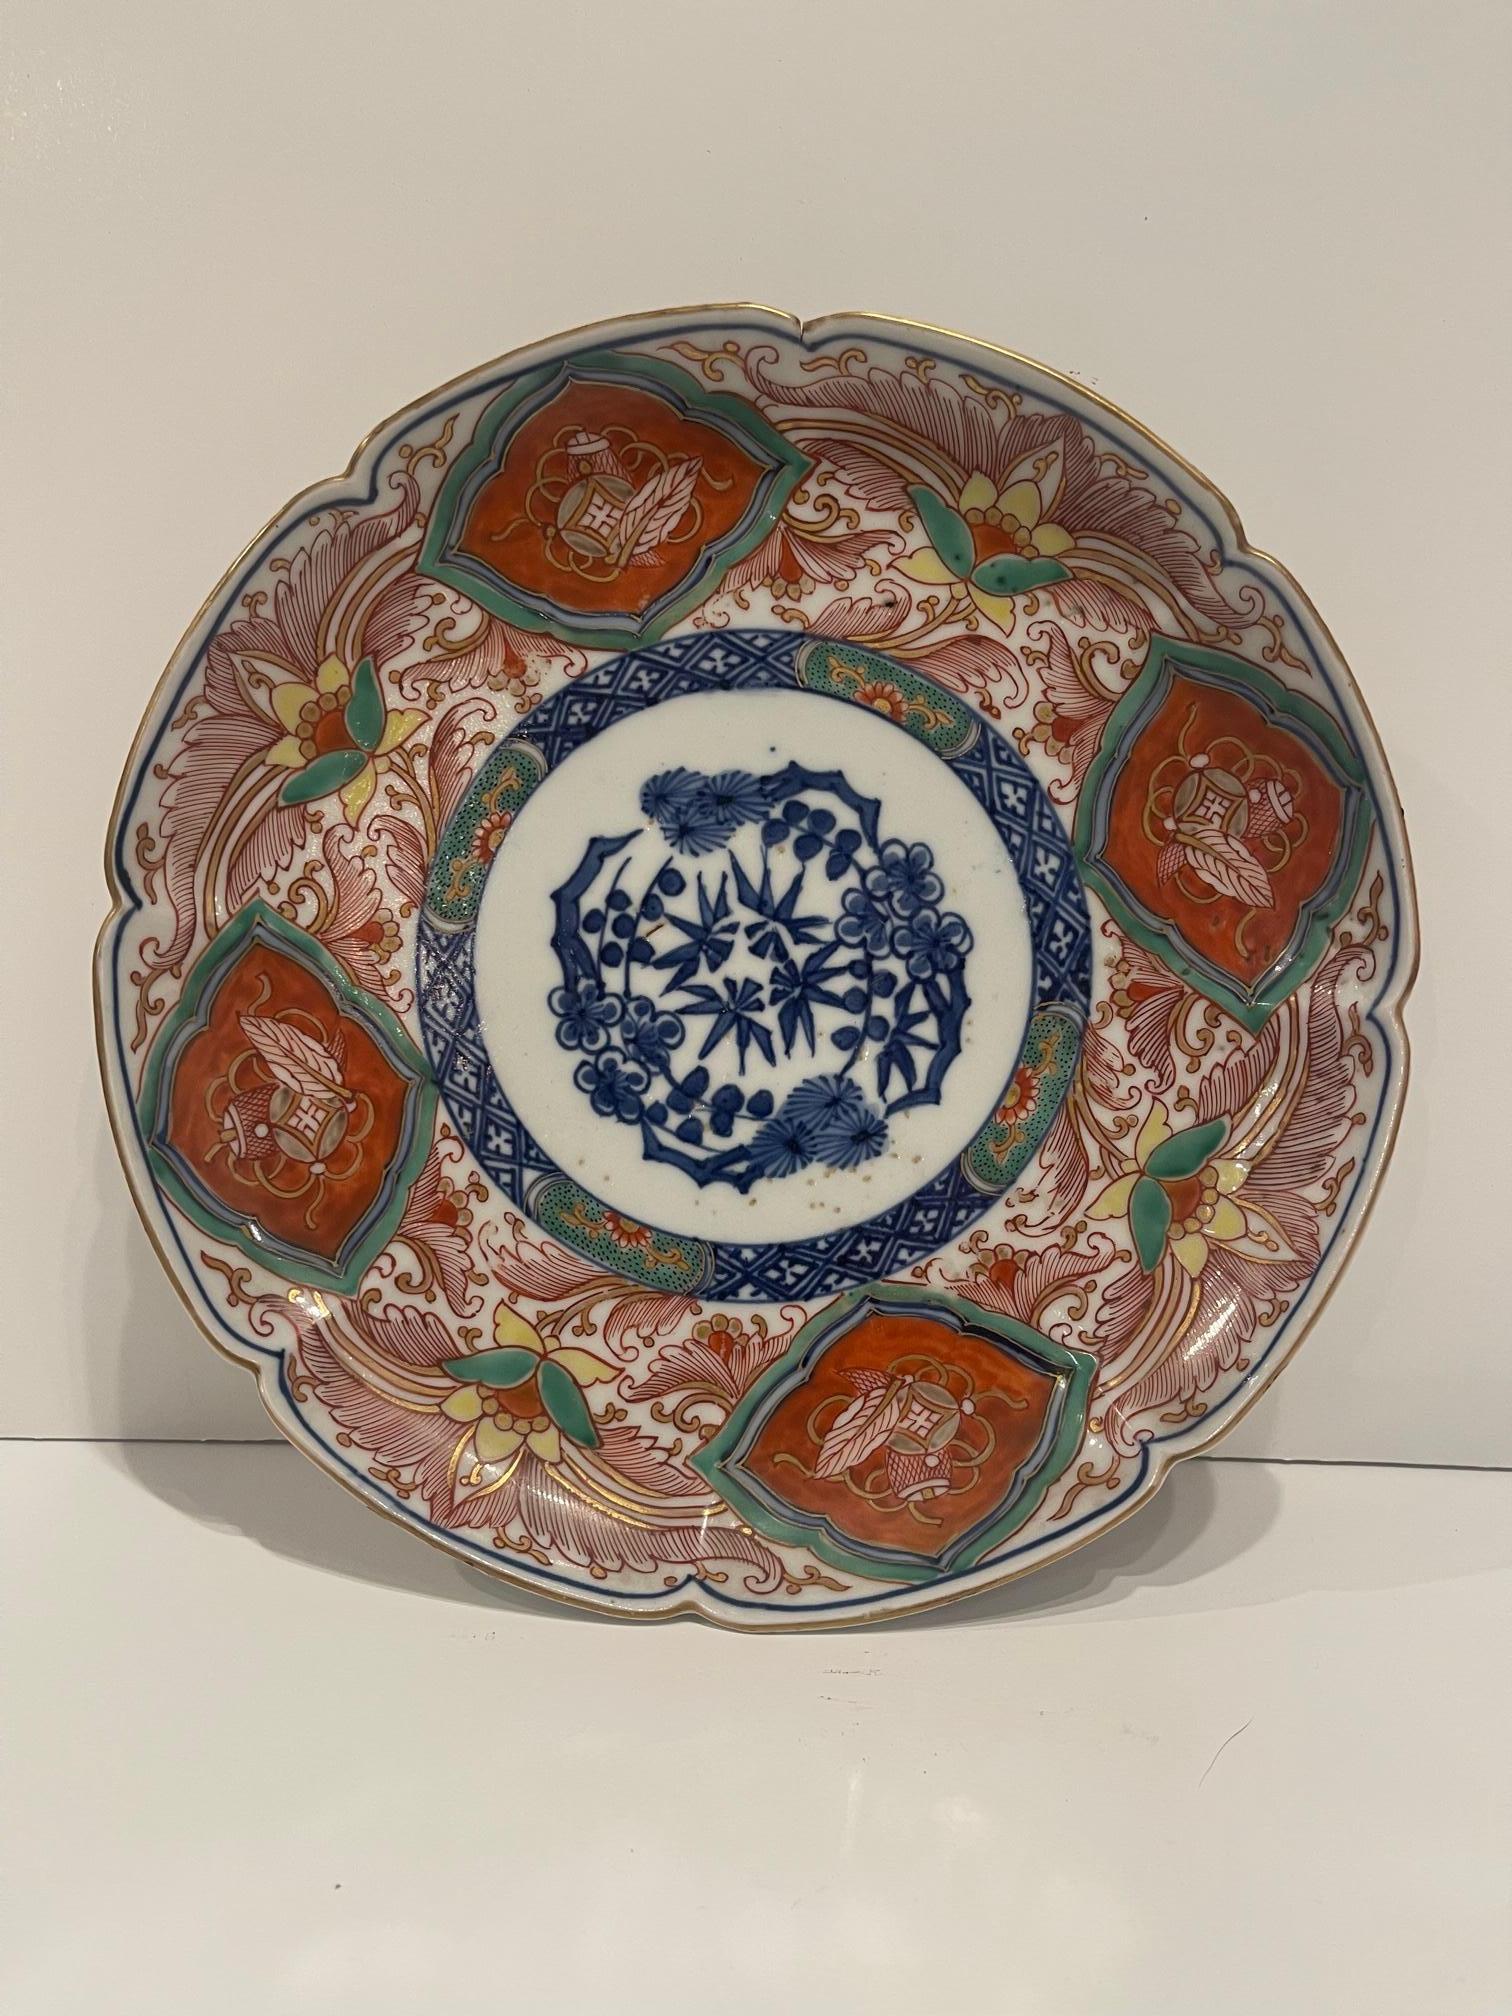 Imari Japanese Charger Porcelain Plate, 19th Century In Good Condition For Sale In Savannah, GA